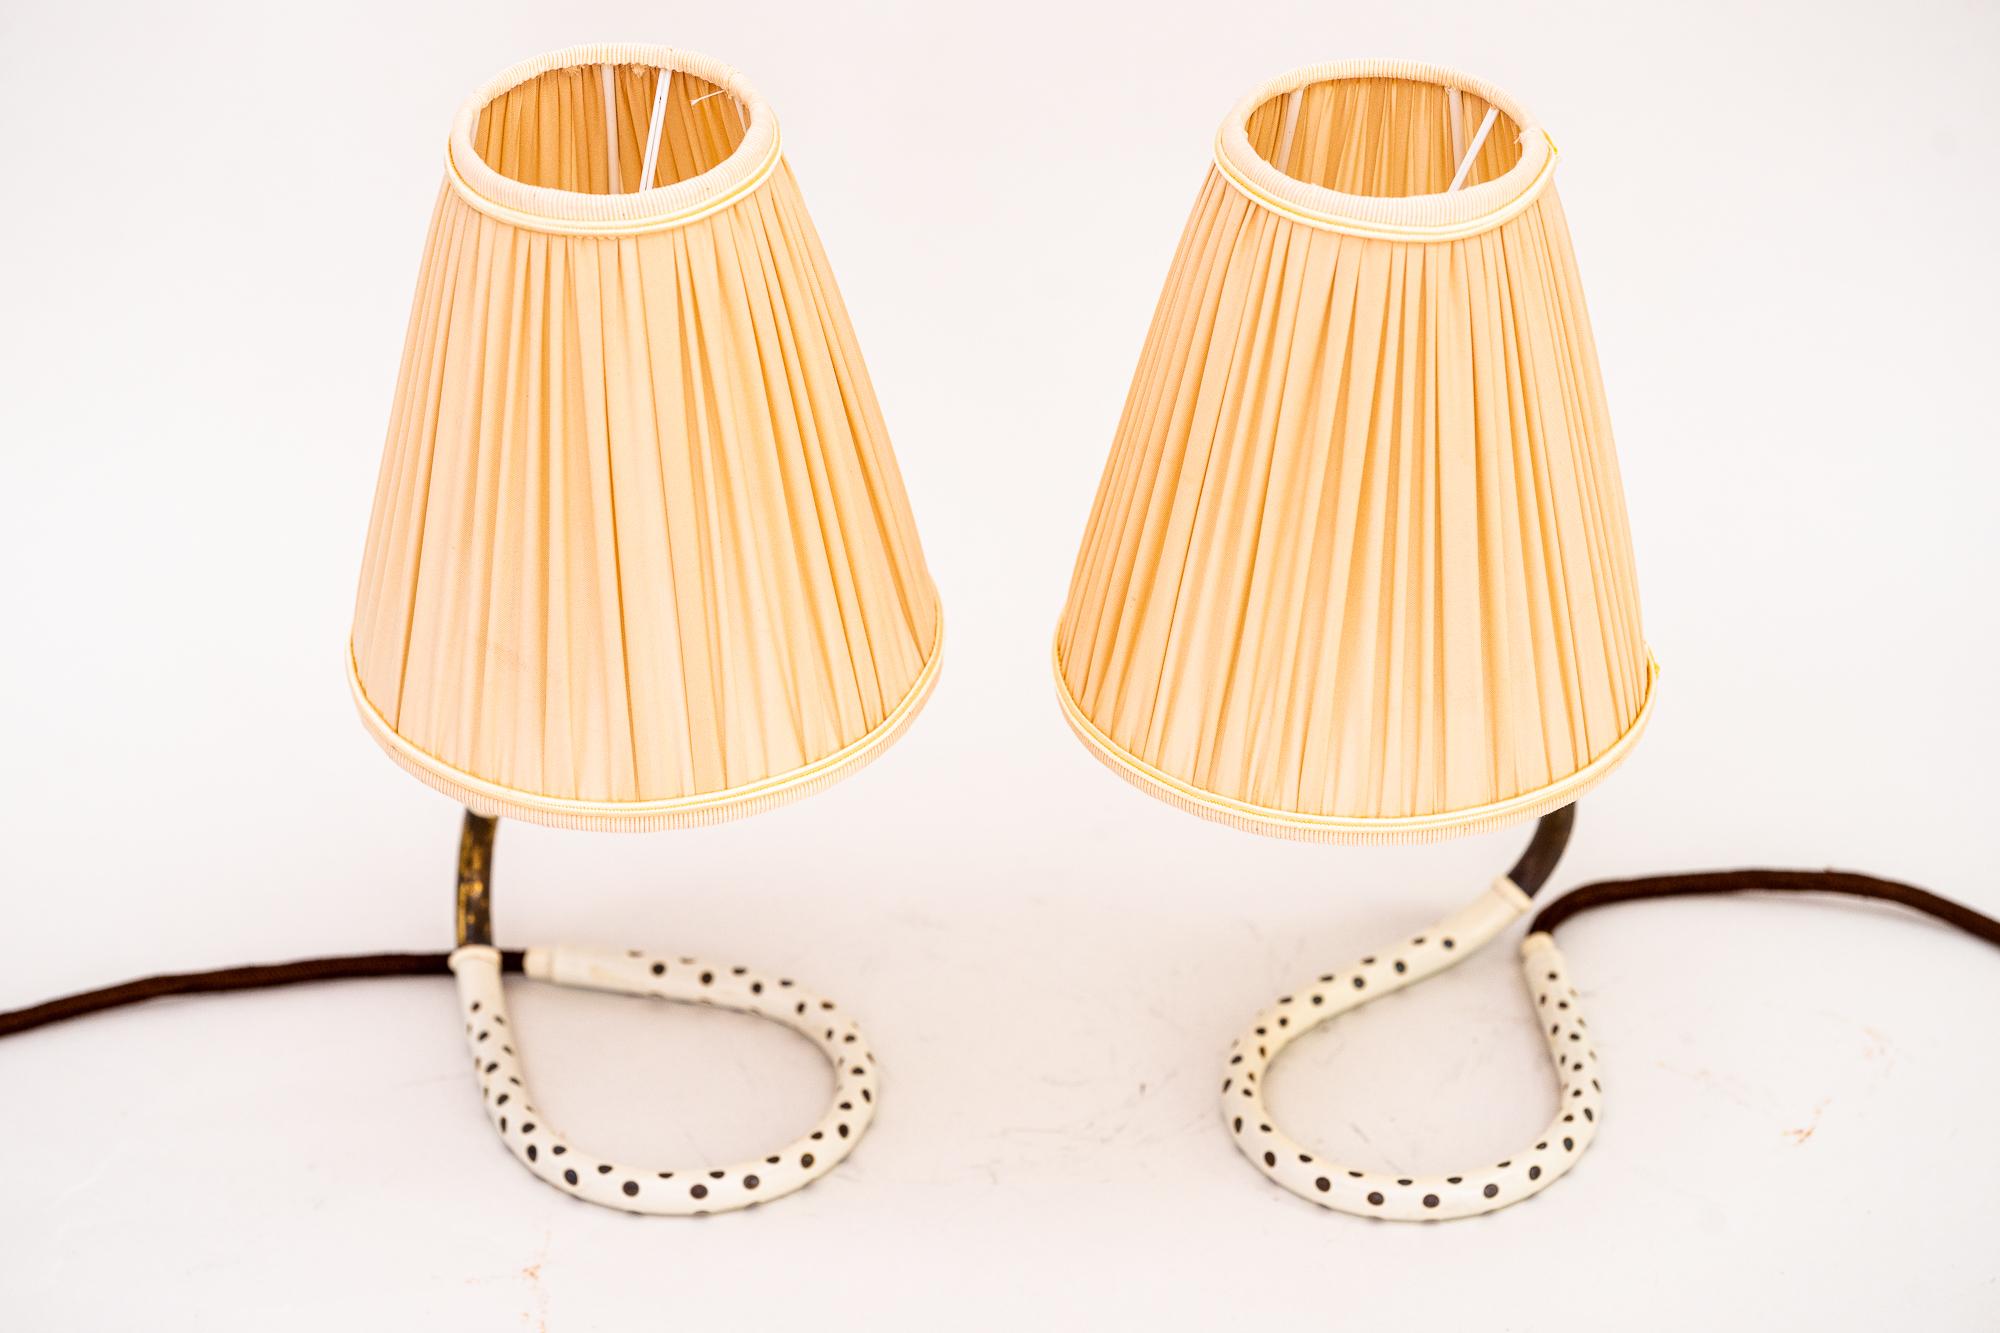 2 Rupert Nikoll Table Lamps Vienna around 1960s with Fabric Shades 9